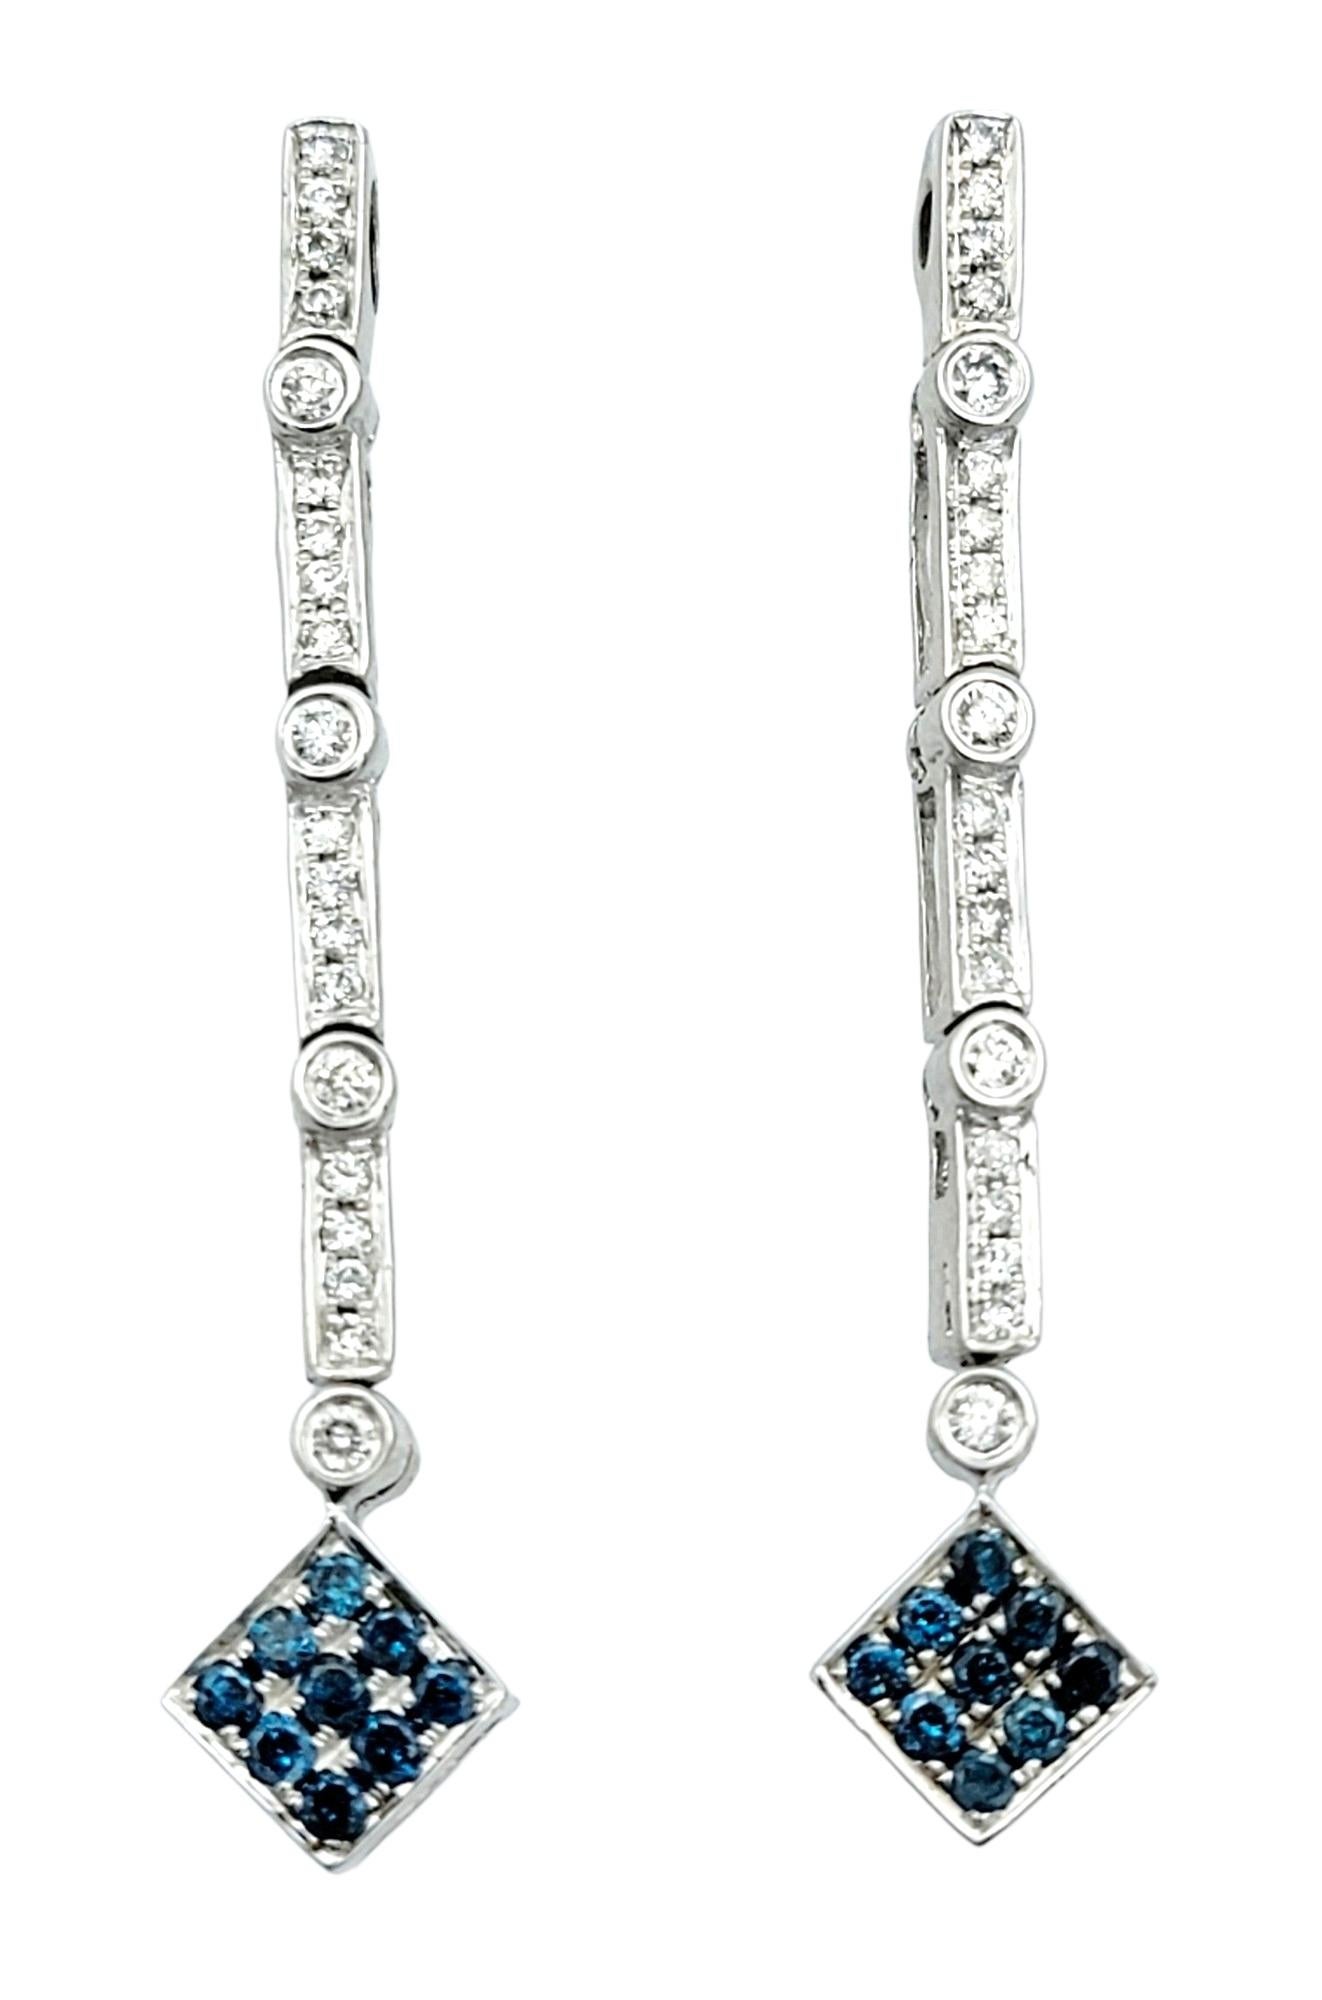 Round Cut Convertible White & Blue Diamond 4 Way Stud and Dangle 14K White Gold Earrings For Sale